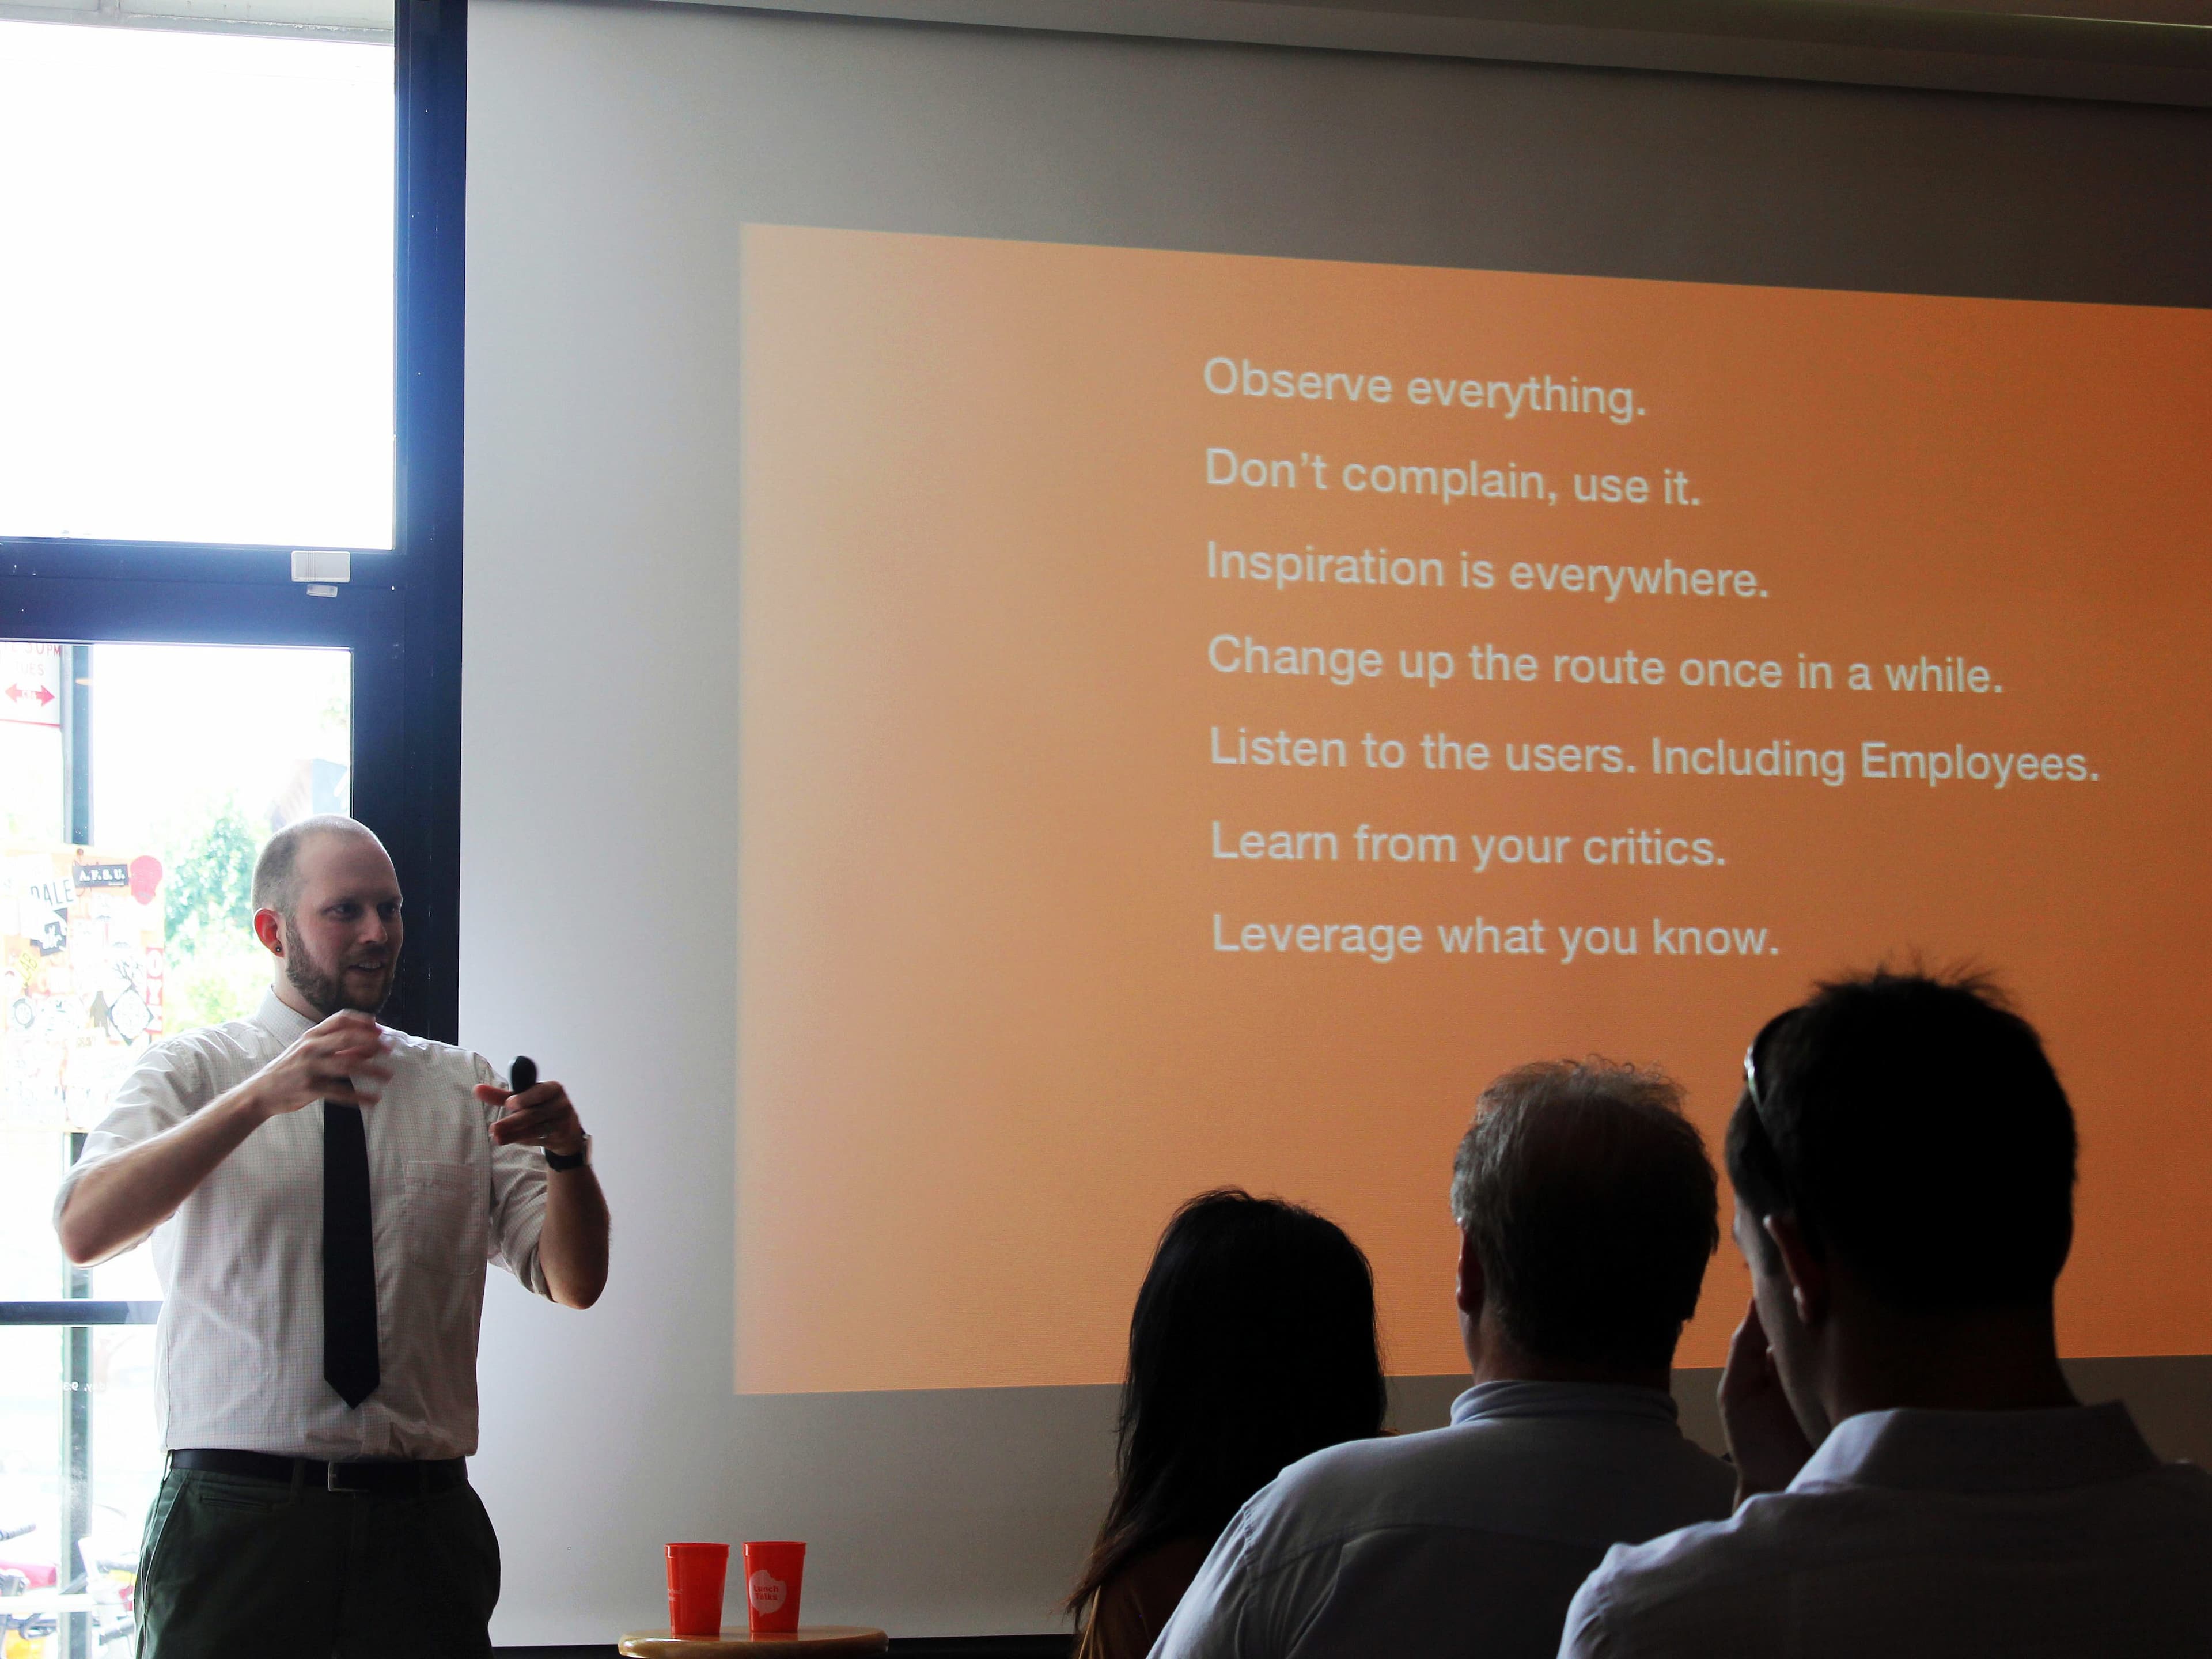 A man in a white shirt and tie is giving a presentation in a room with several people seated. Behind him, an orange slide with text is projected on the screen that includes tips such as "Observe everything" and "Inspiration is everywhere.